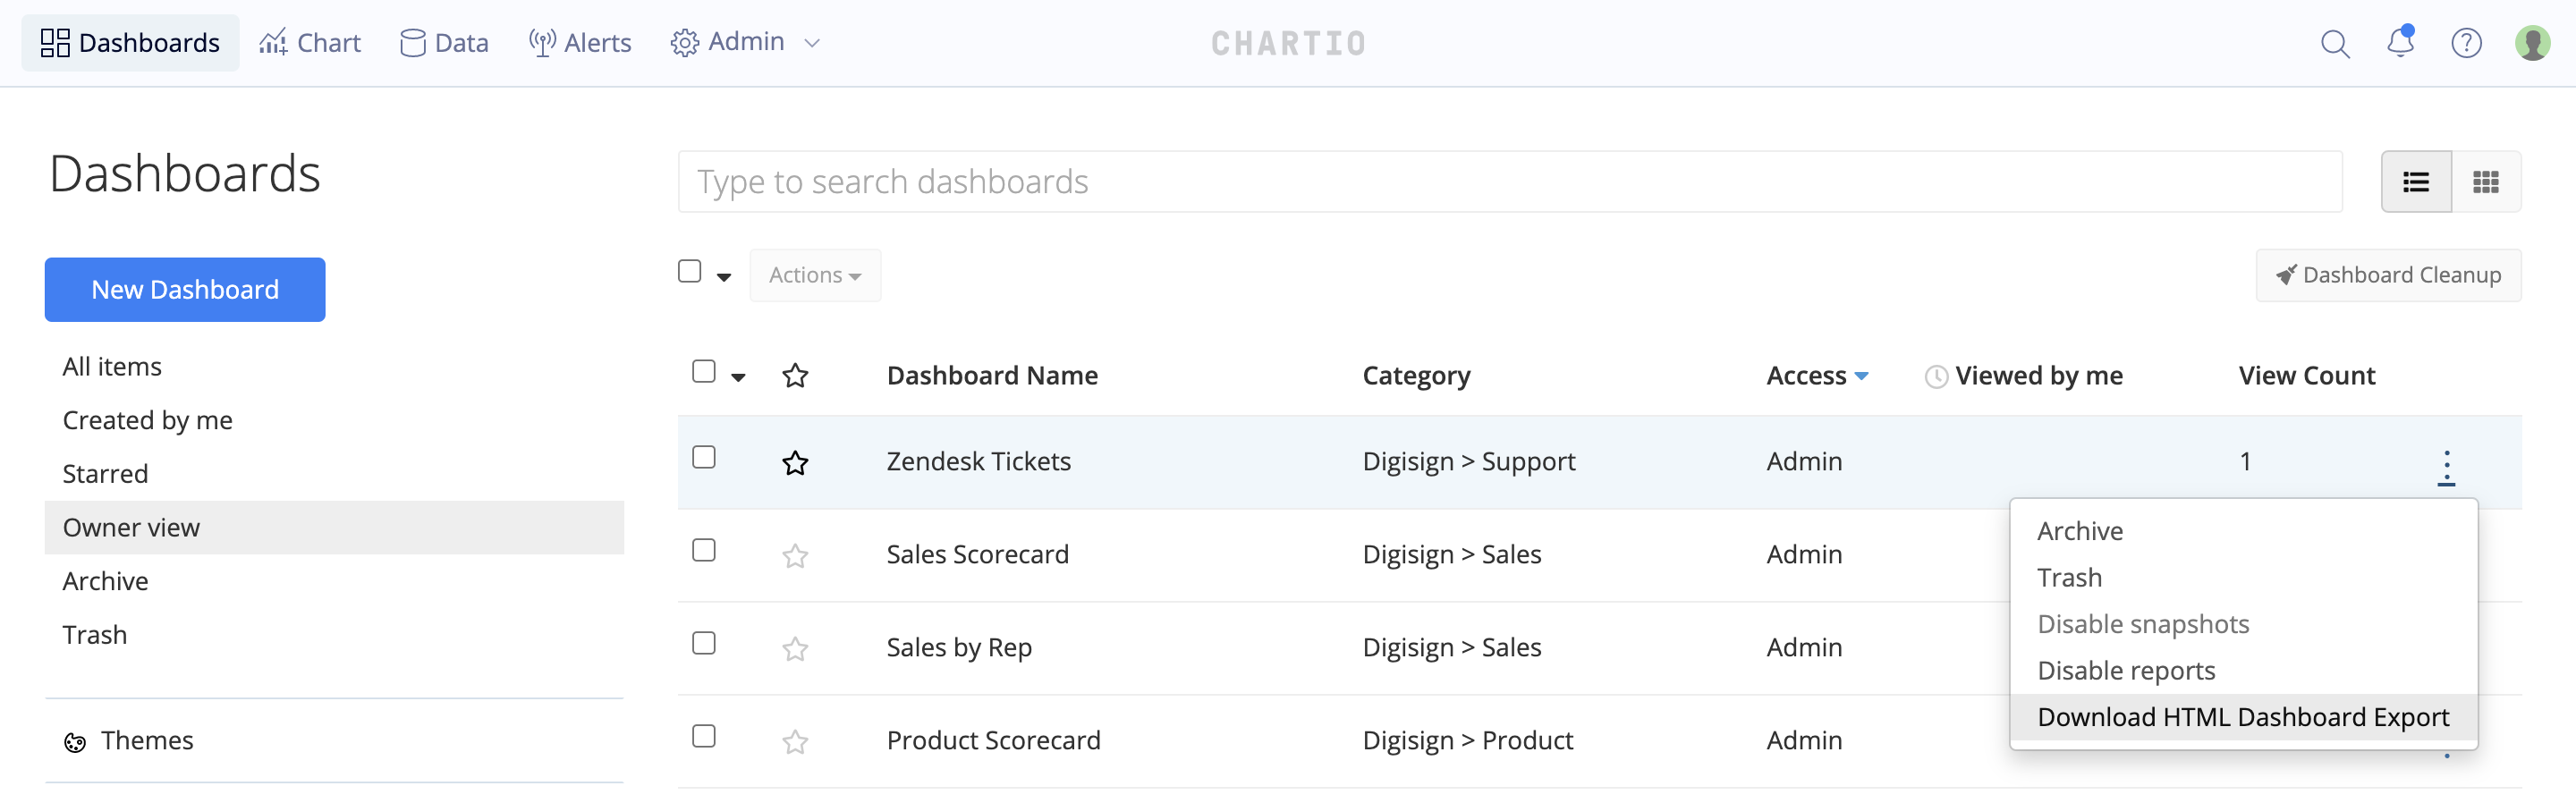 Download HTML exports for dashboards in the Owner view